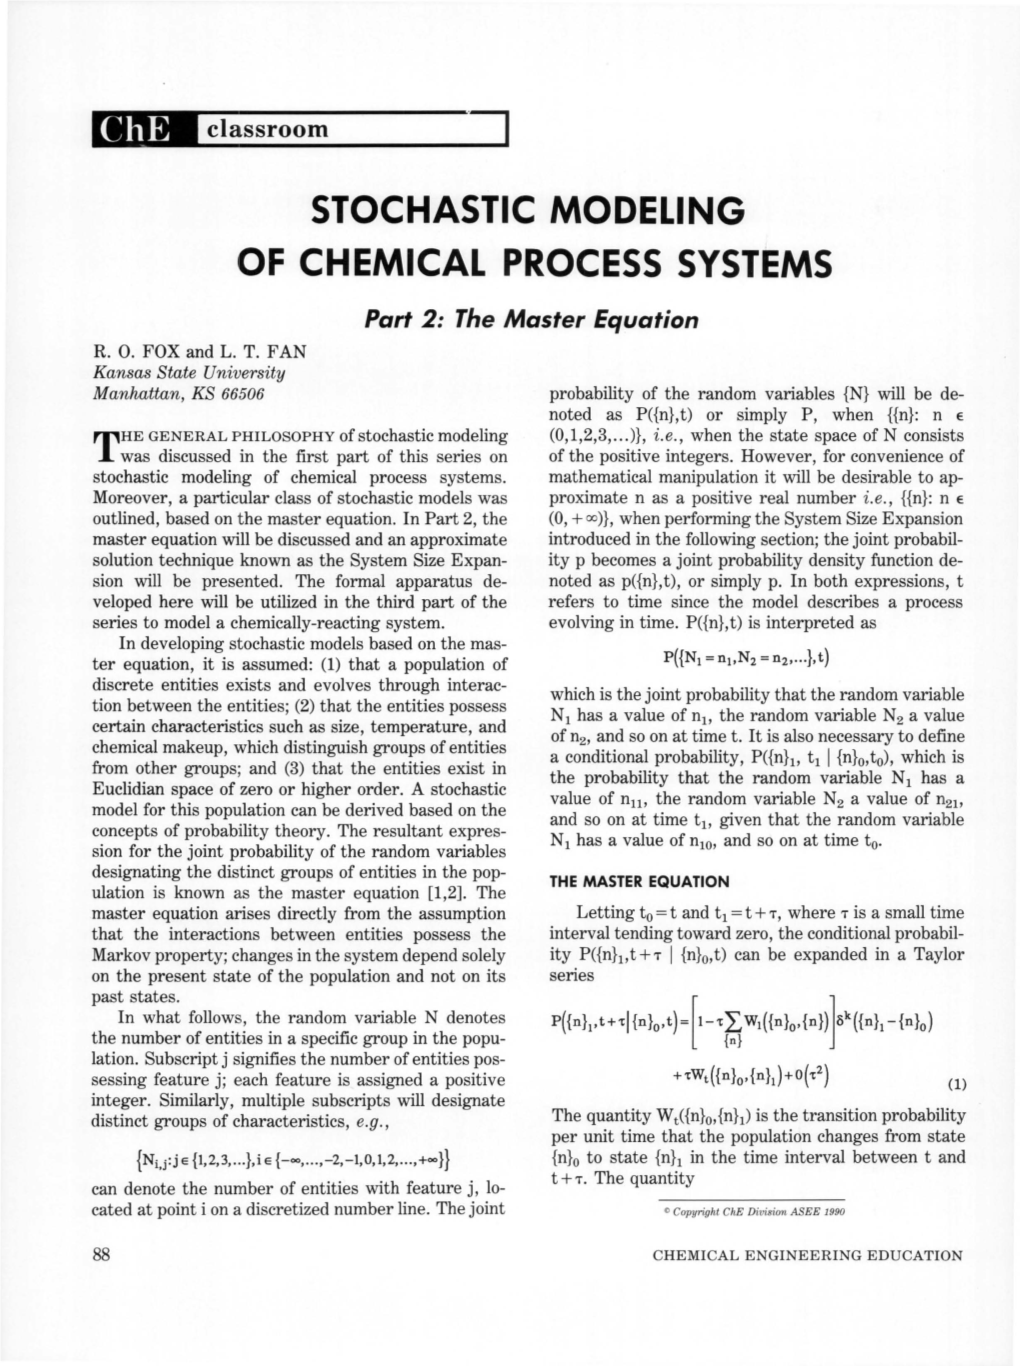 STOCHASTIC MODELING of CHEMICAL PROCESS SYSTEMS Part 2: the Master Equation R